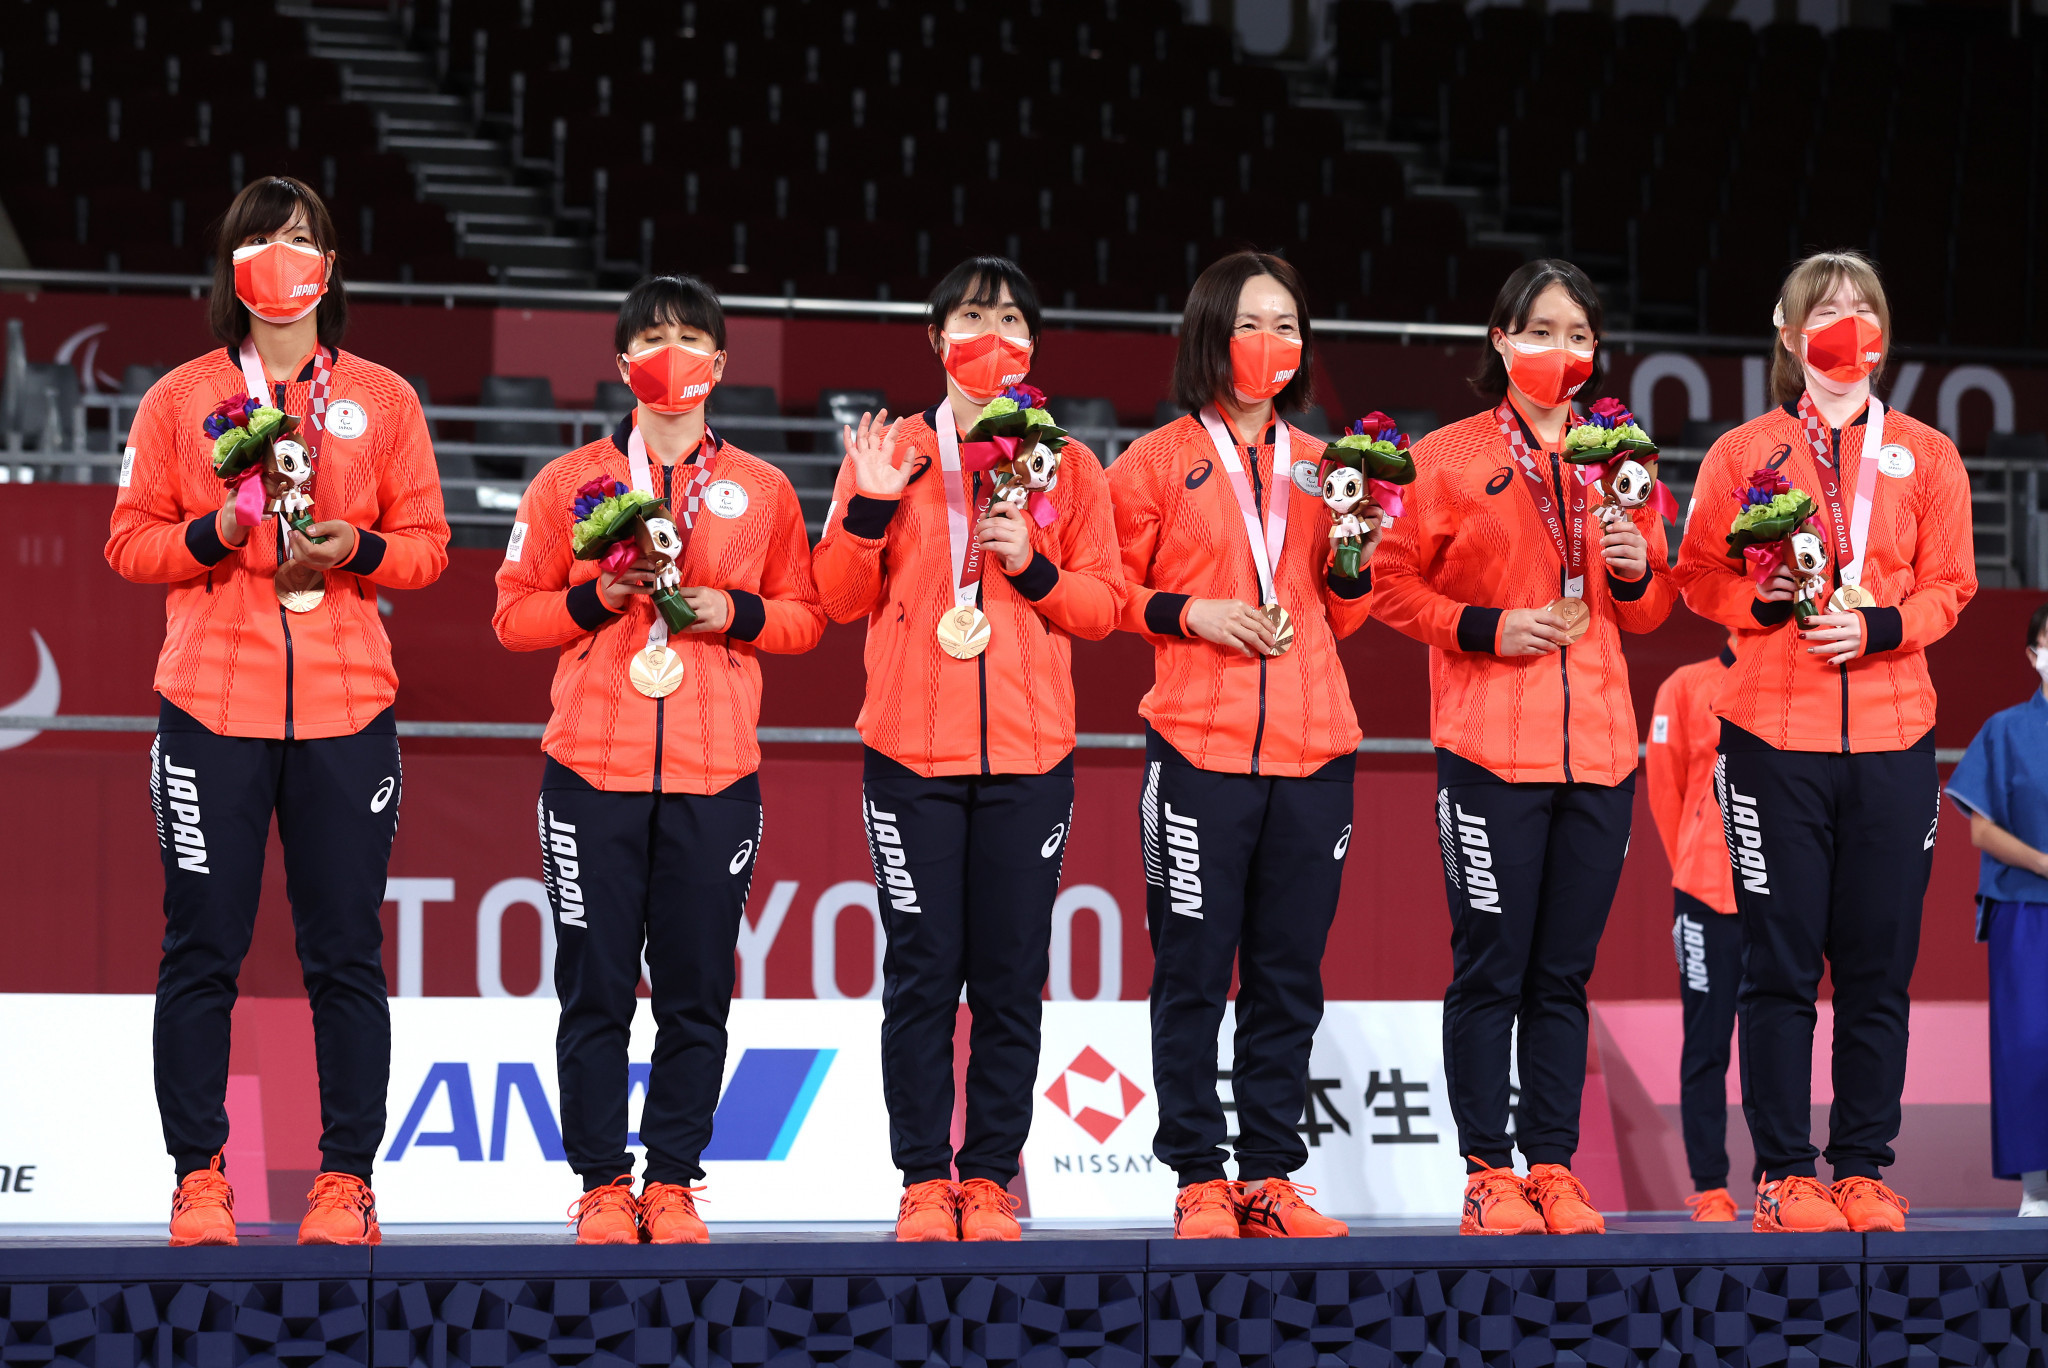 Tokyo 2020 bronze medallists Japan are the reigning women's champions ©Getty Images